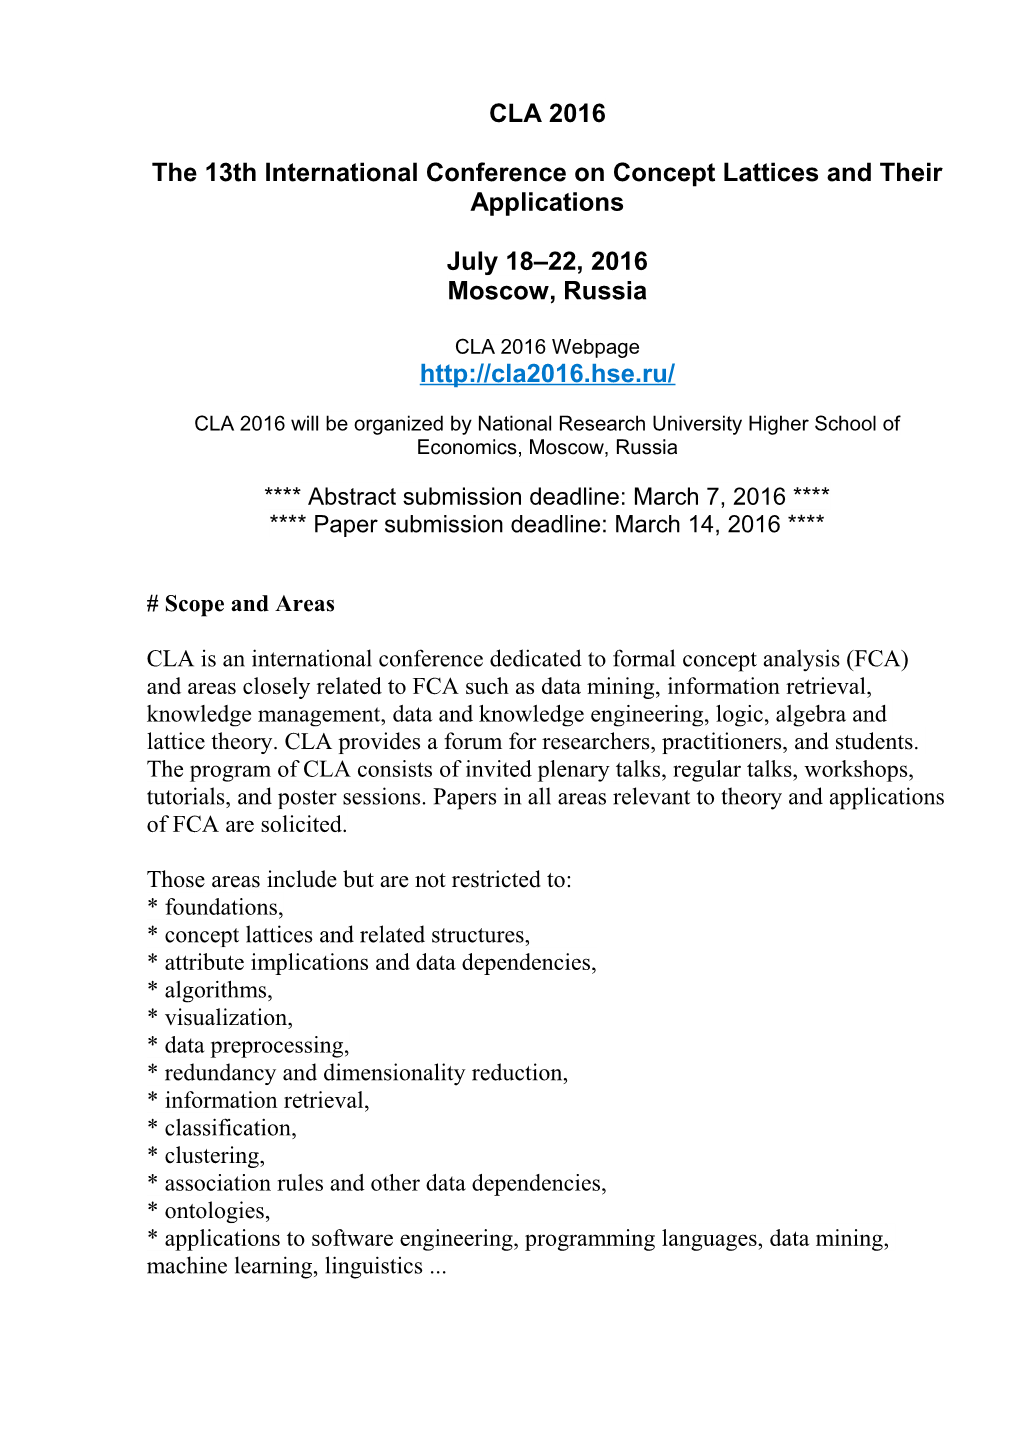 CLA 2016 Will Be Organized by National Research University Higher School of Economics